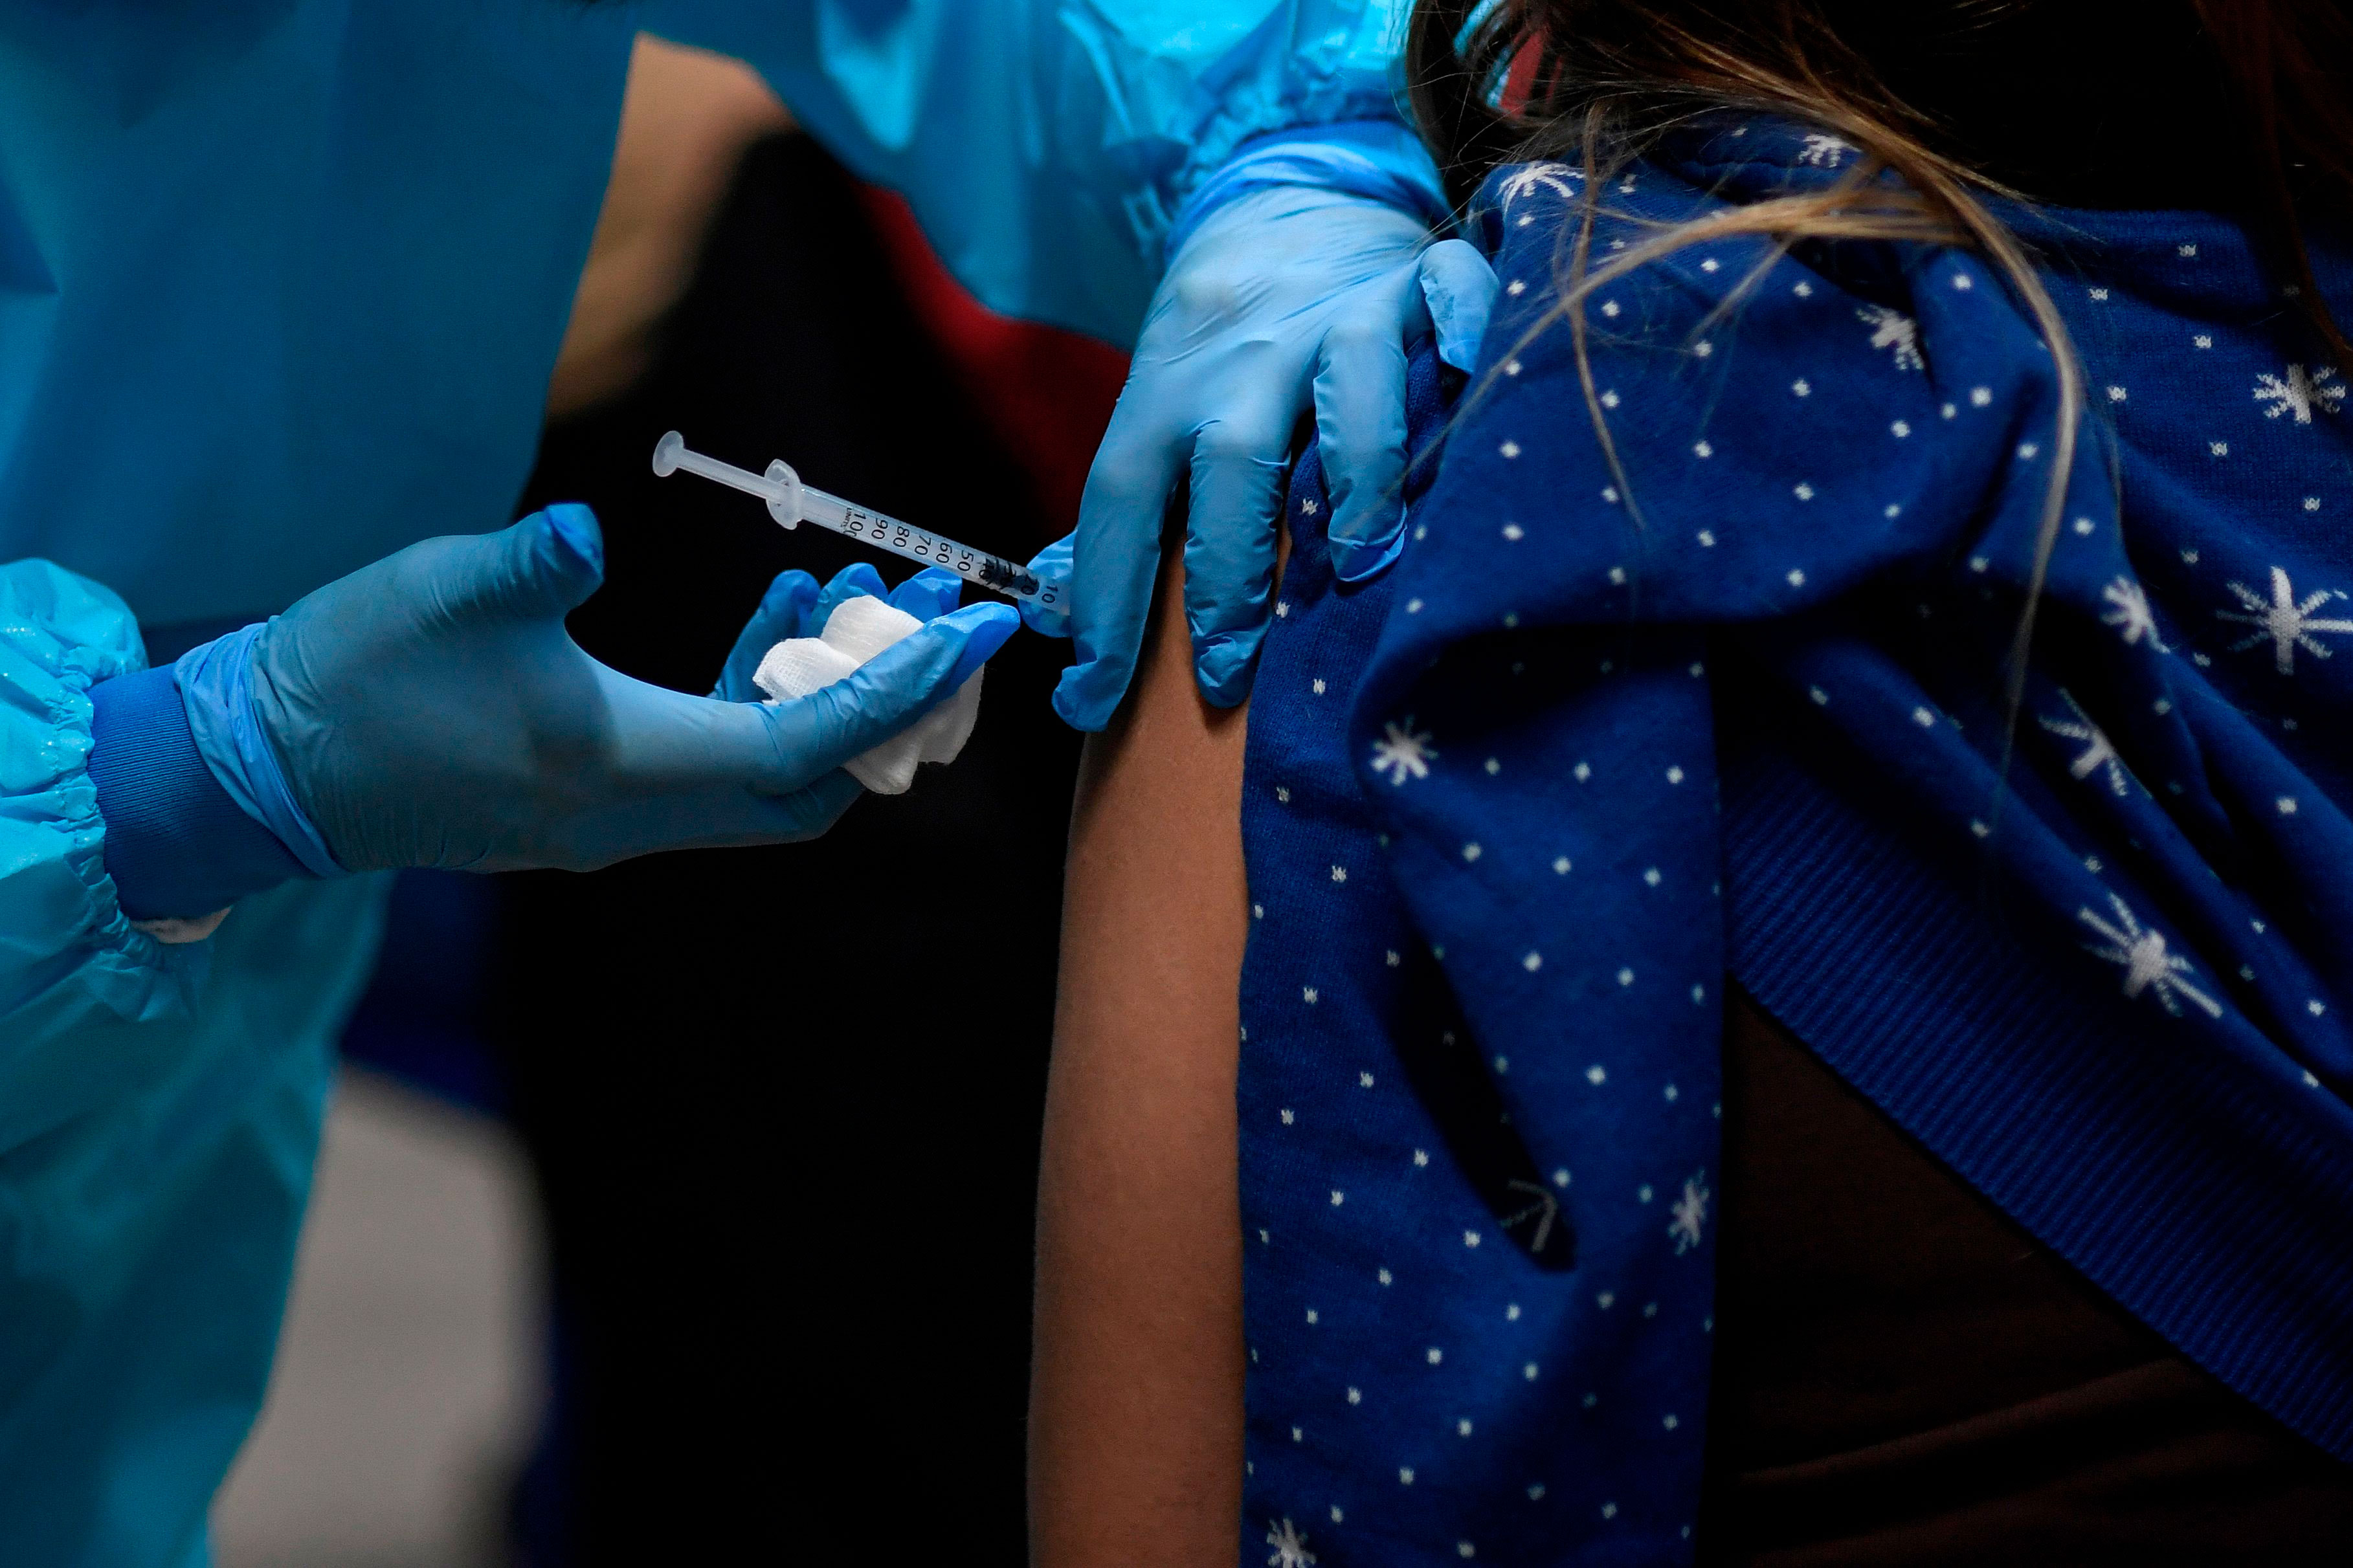 A health worker administers the Pfizer/BioNTech Covid-19 vaccine to a member of the Emergency Medical Services of Madrid (SUMMA) in Spain on January 12.